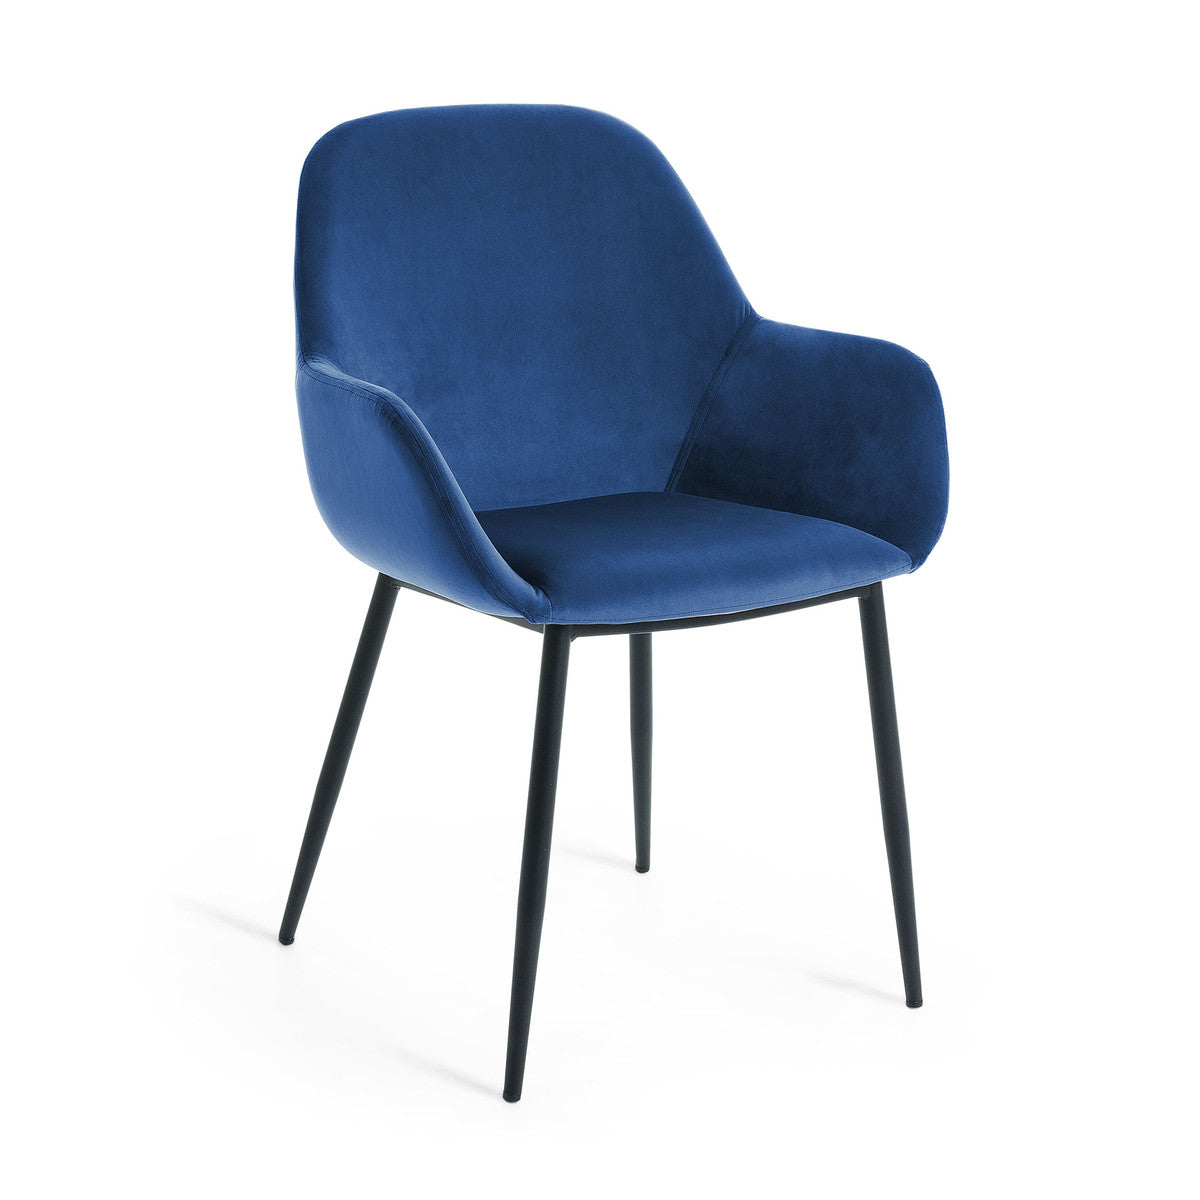 Konna Dining Chair Powder Coated